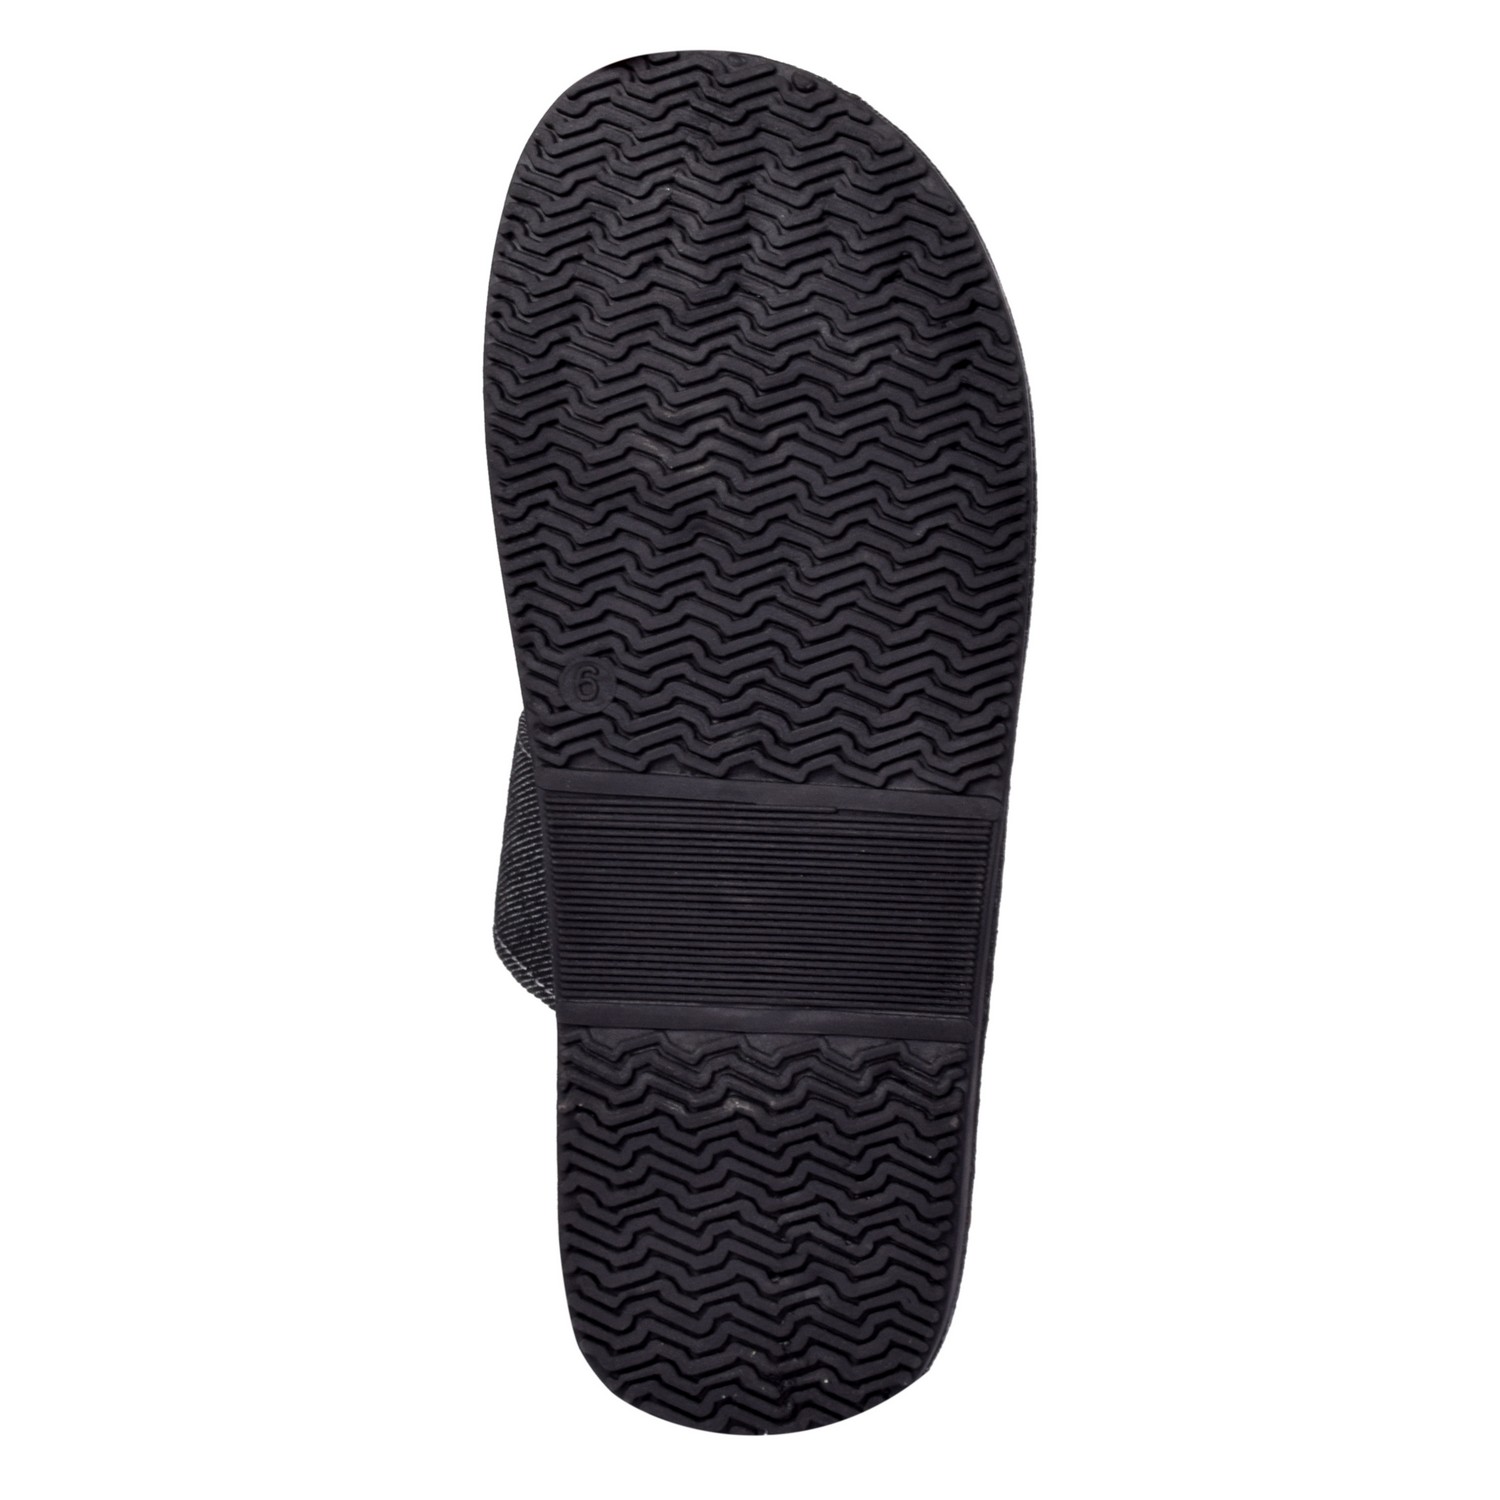 Buy Slipper Style Height New look for Men Online @ ₹349 from ShopClues